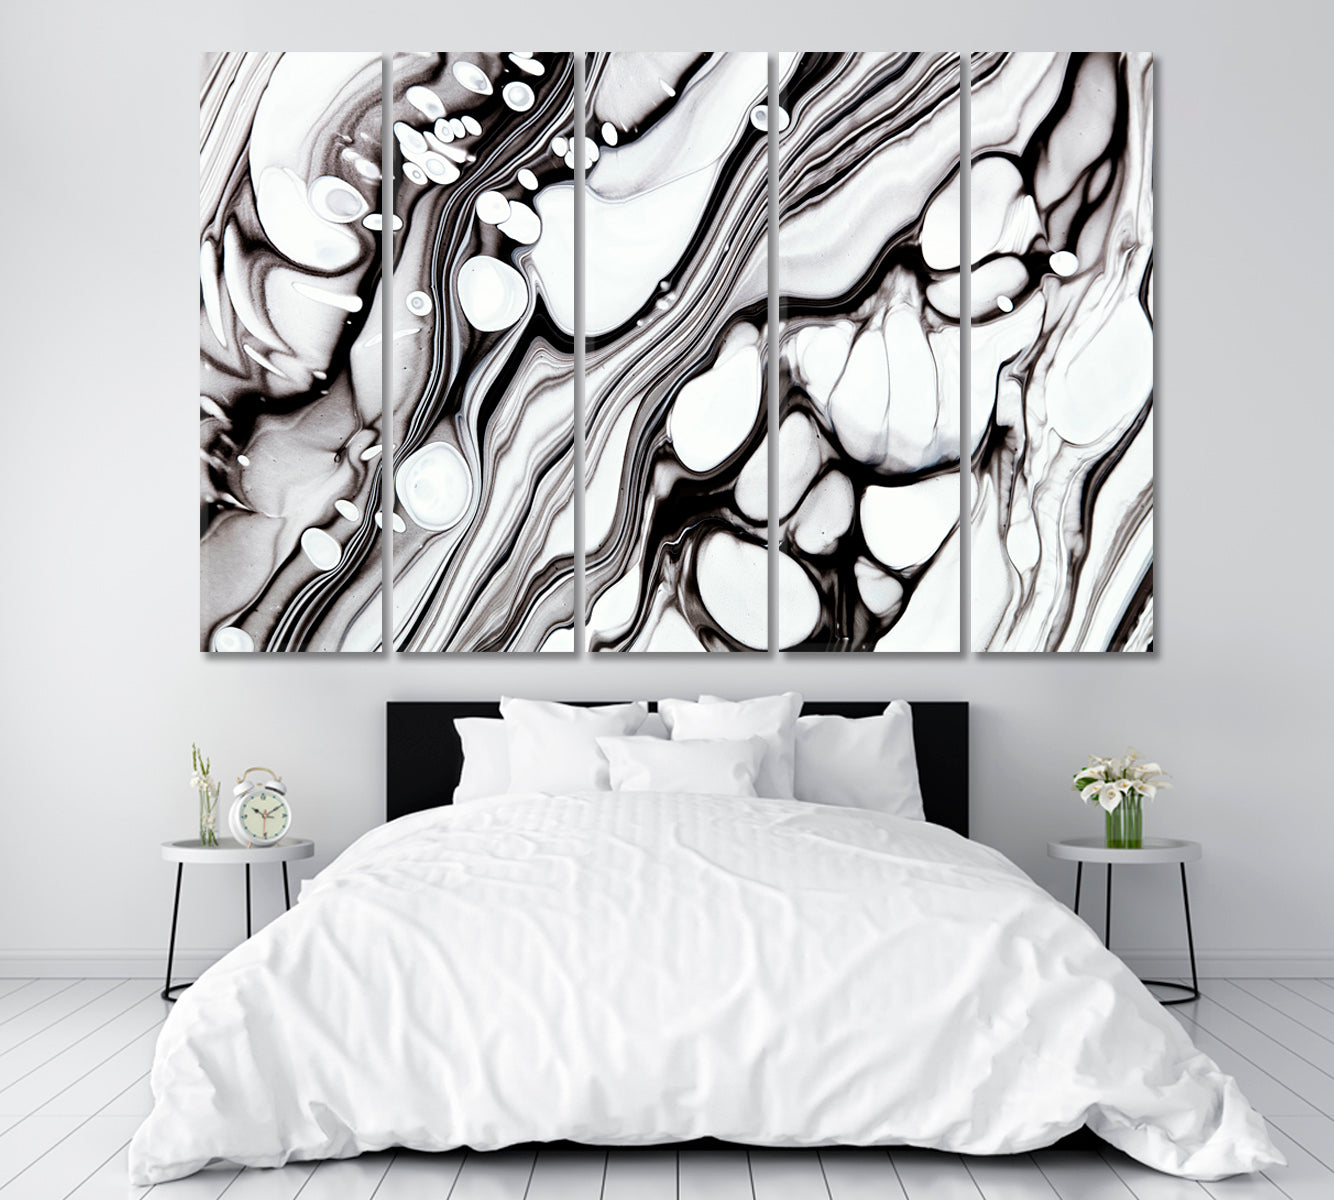 Black and White Marble Waves Canvas Print ArtLexy 5 Panels 36"x24" inches 